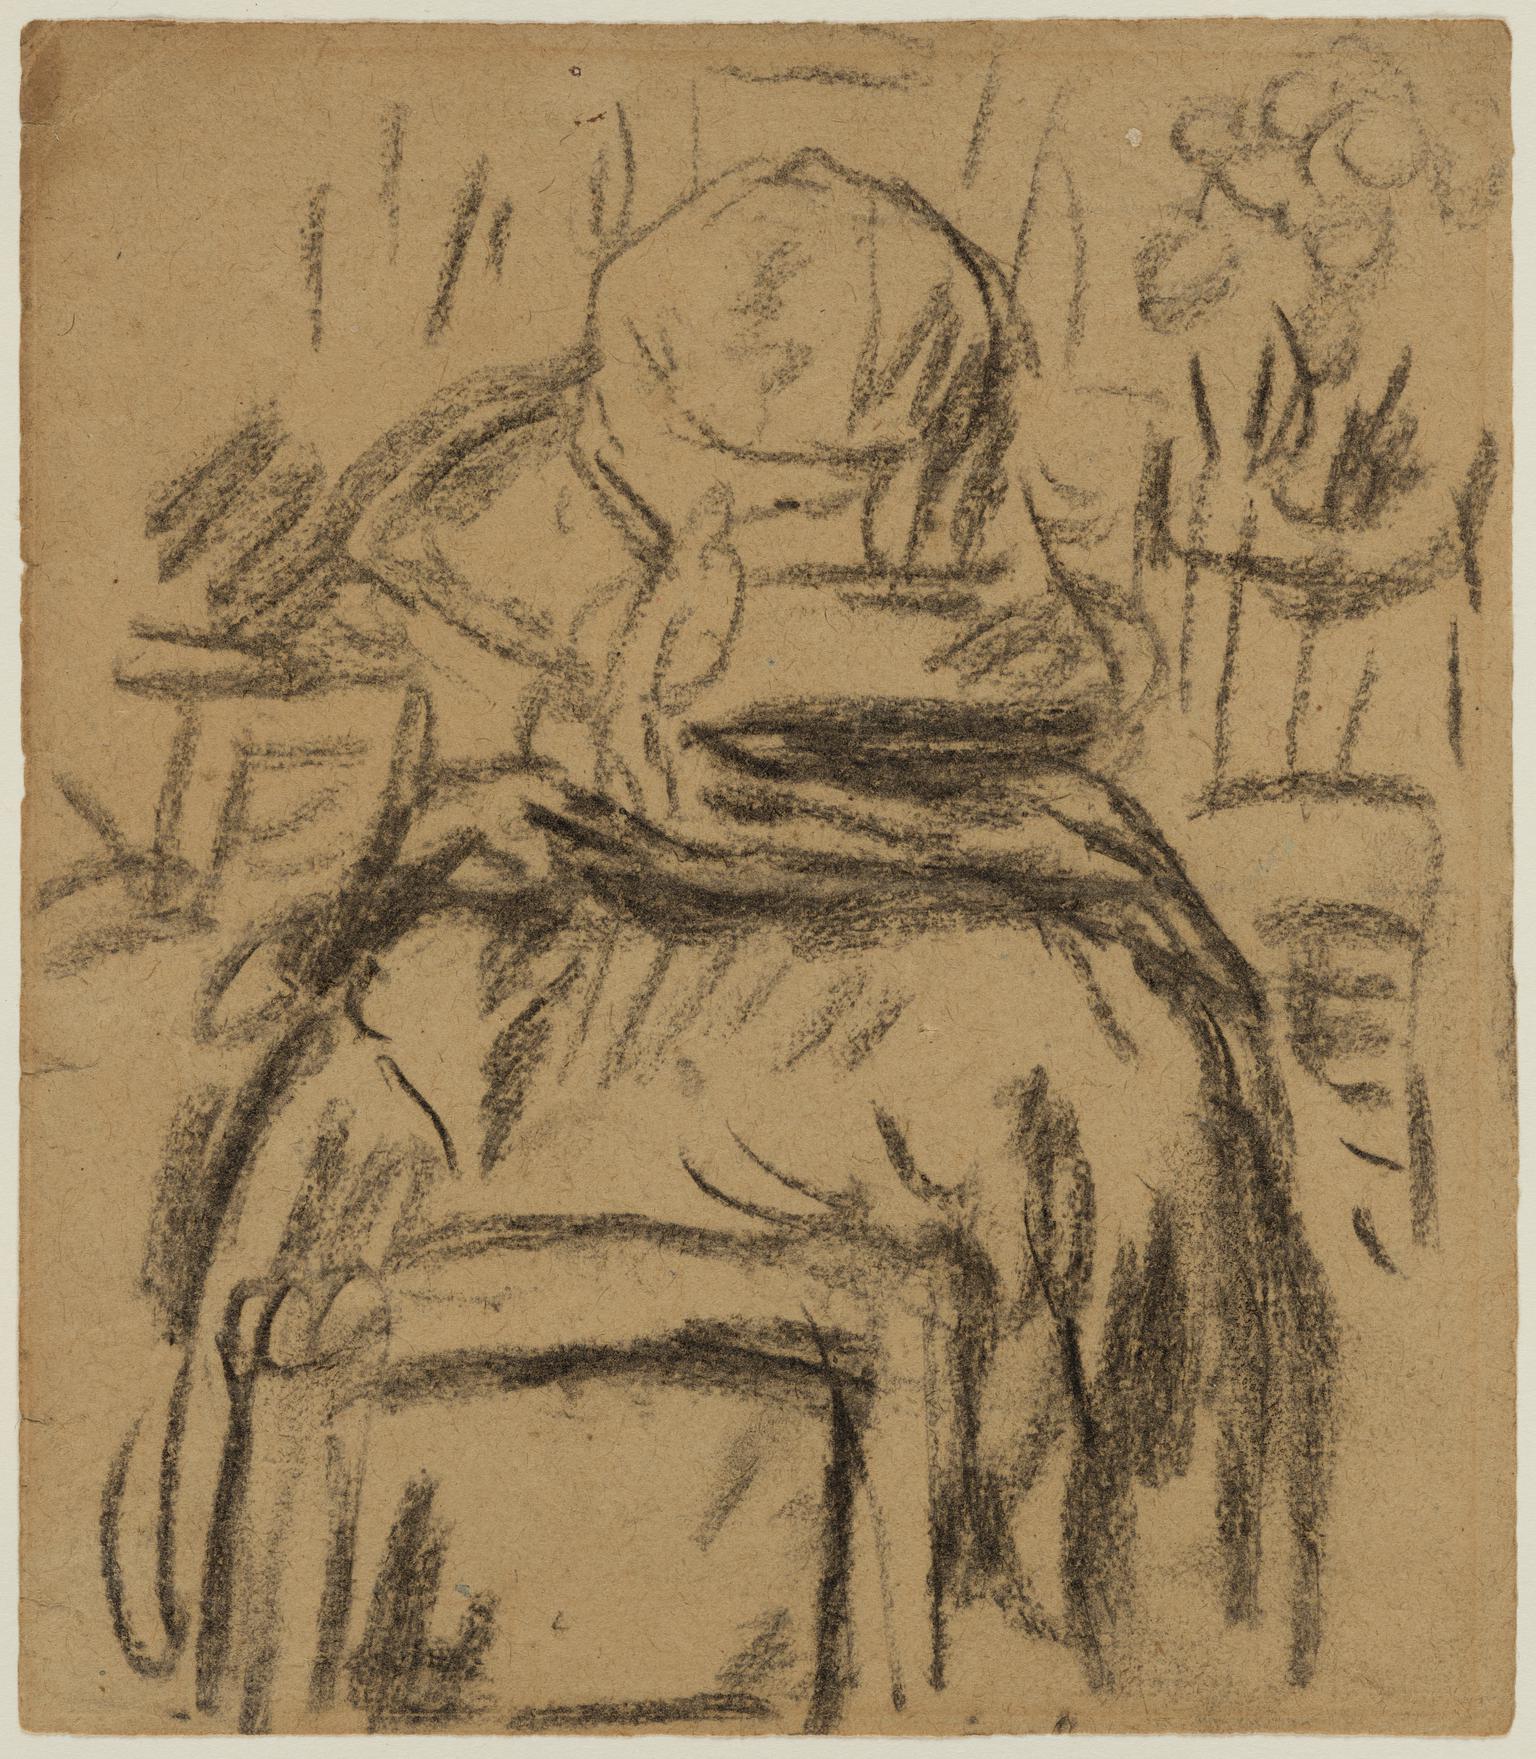 Seated lady wearing a hat